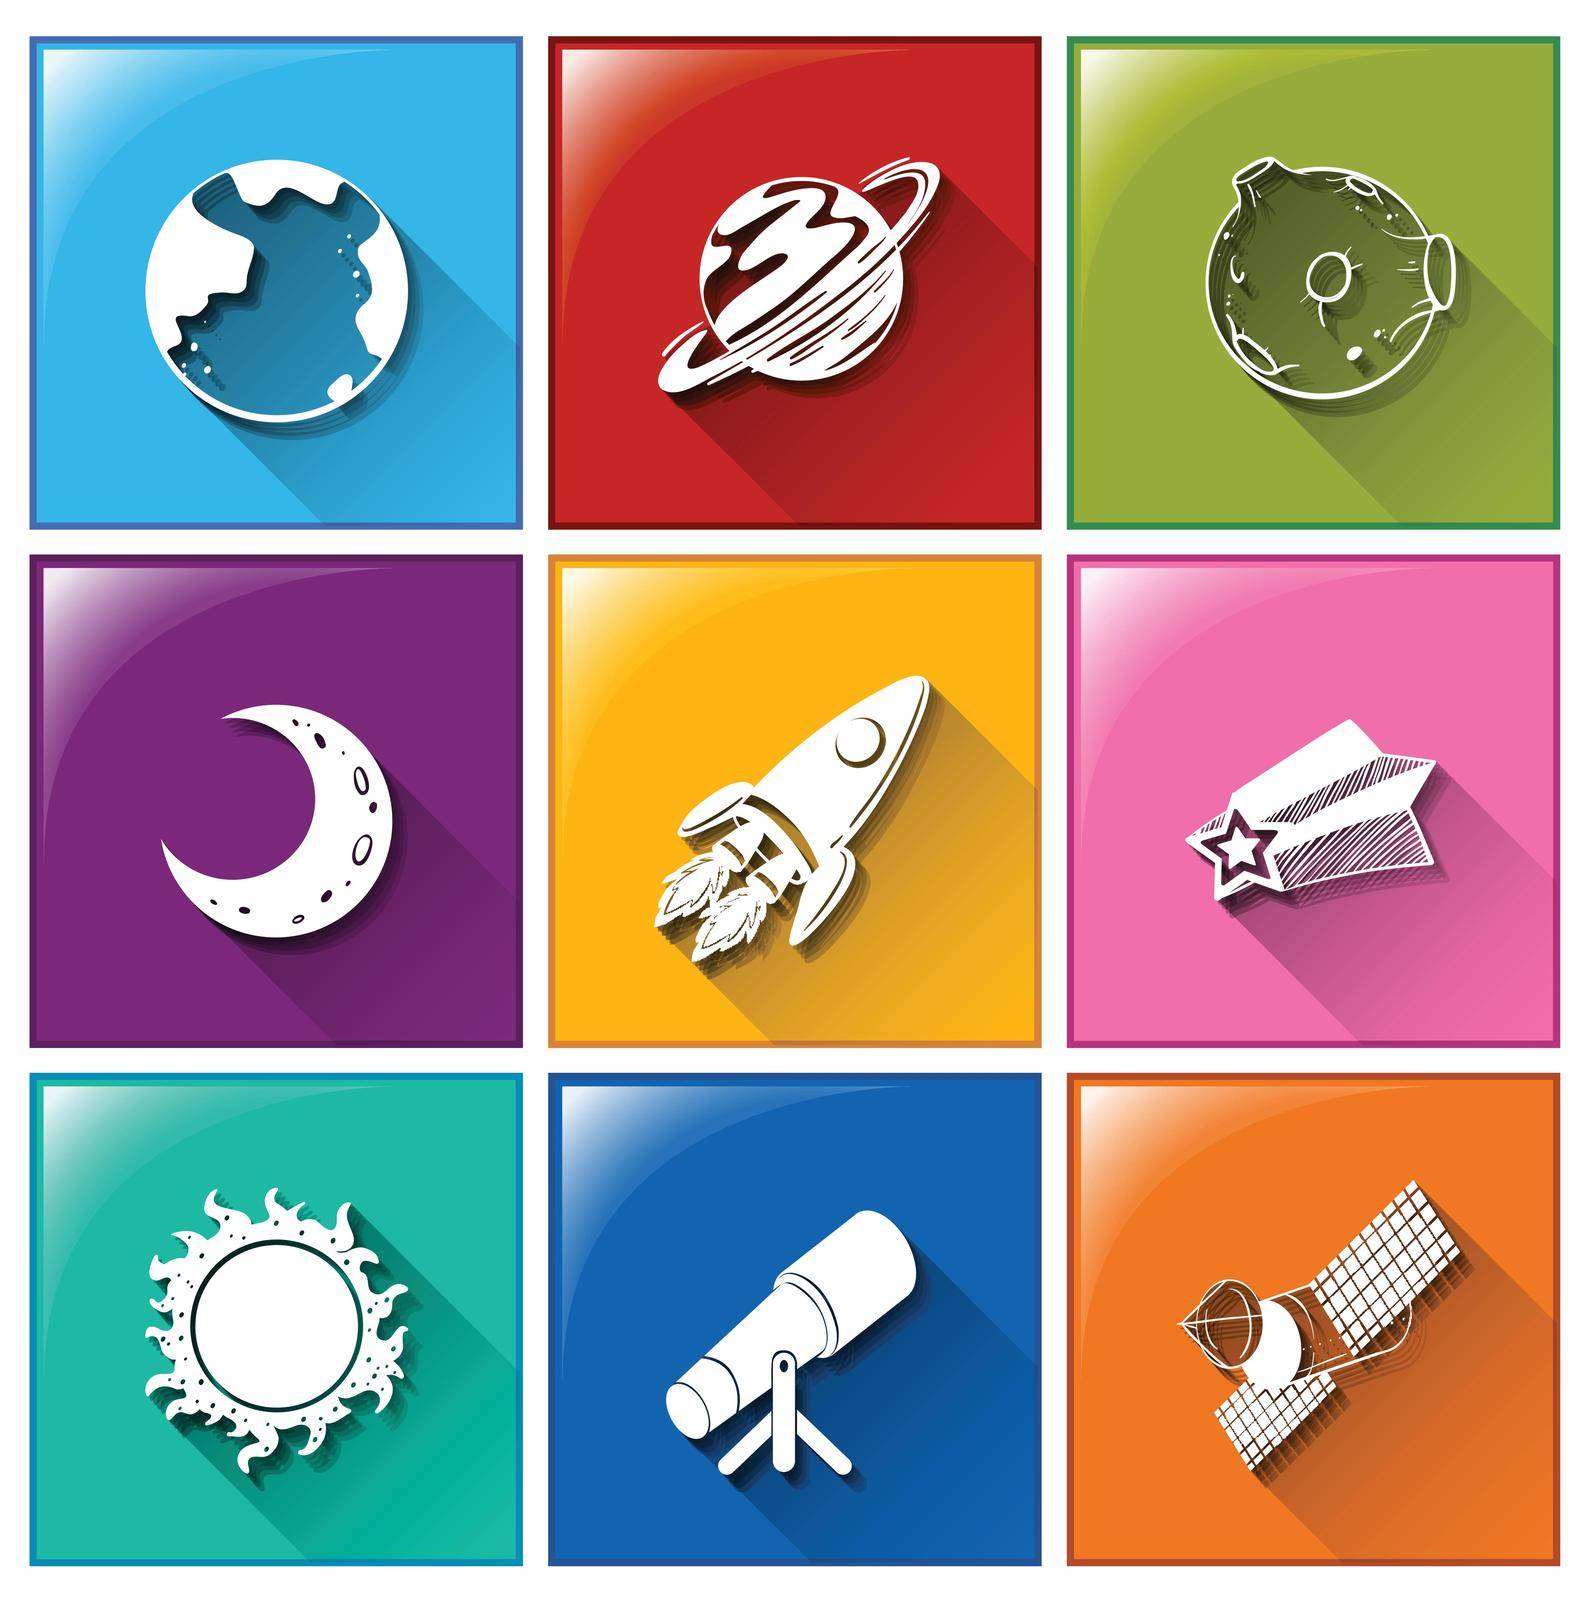 Illustration of the icons with the things found in the outerspace on a white background